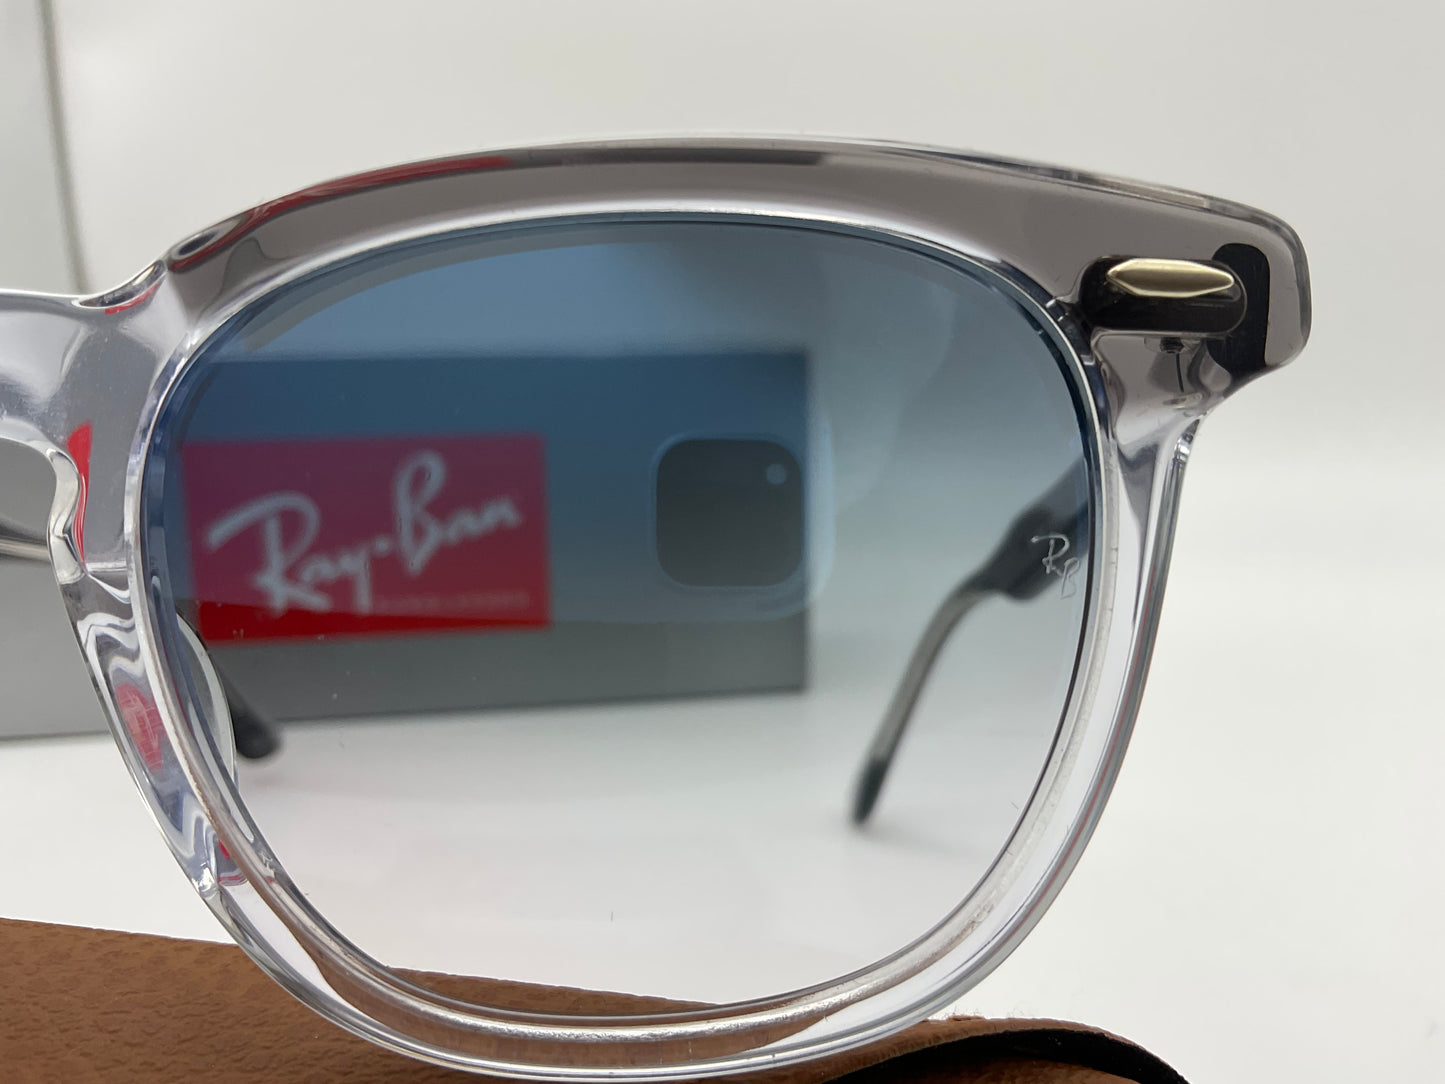 Ray Ban Hawkeye 52mm RB2298 Transparent Gray/ Clear Gradient Blue 13553F Italy NEW